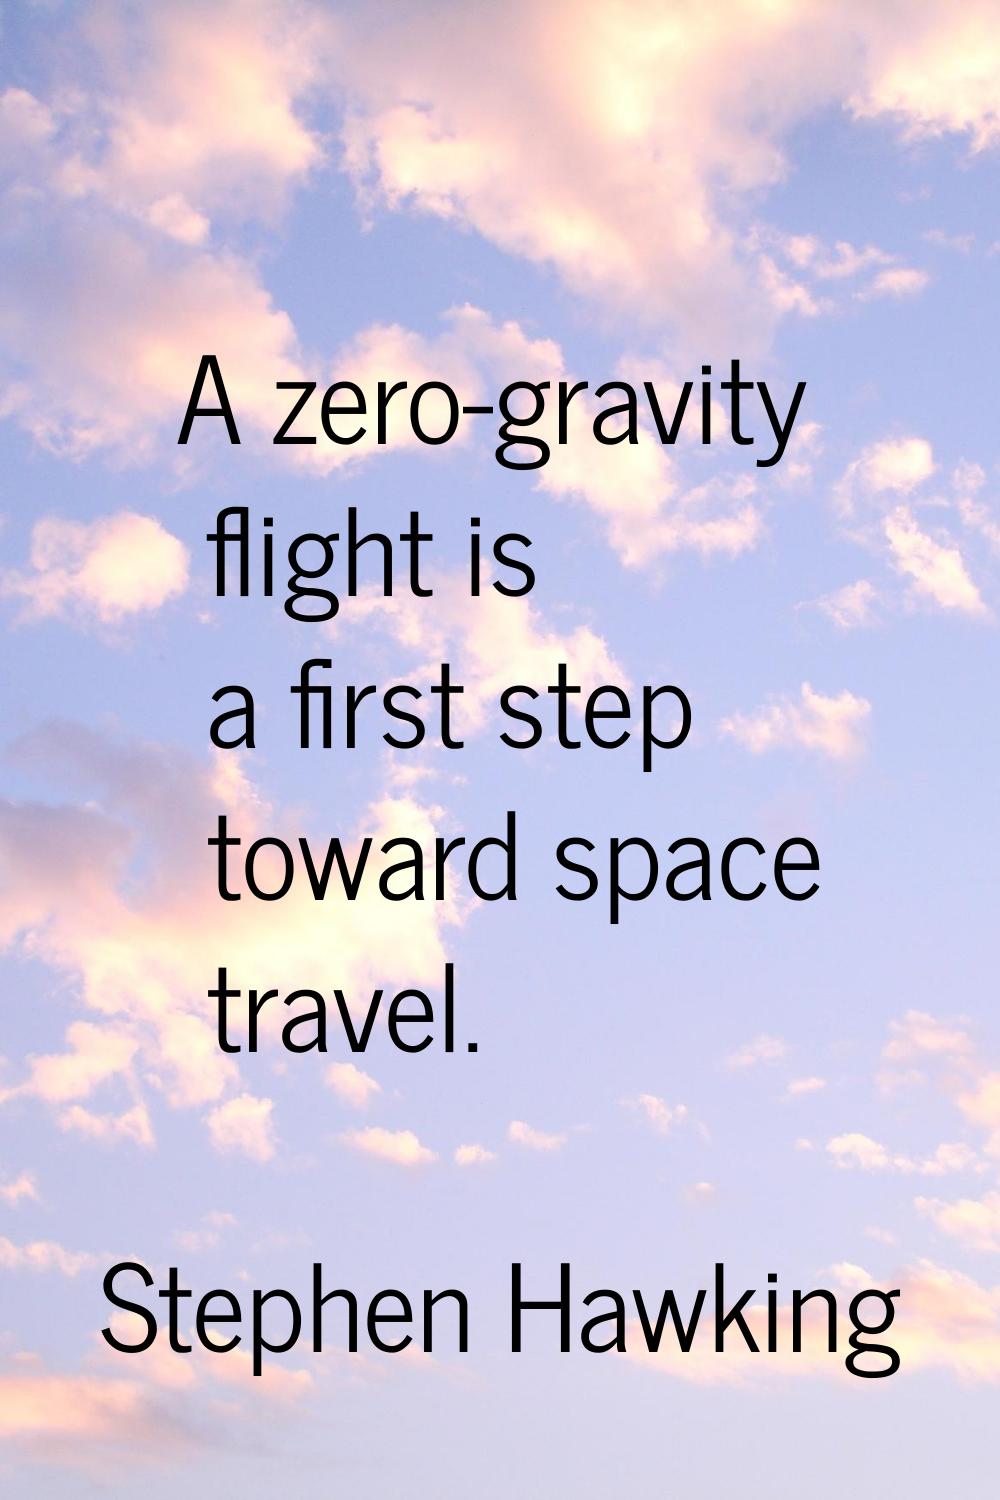 A zero-gravity flight is a first step toward space travel.